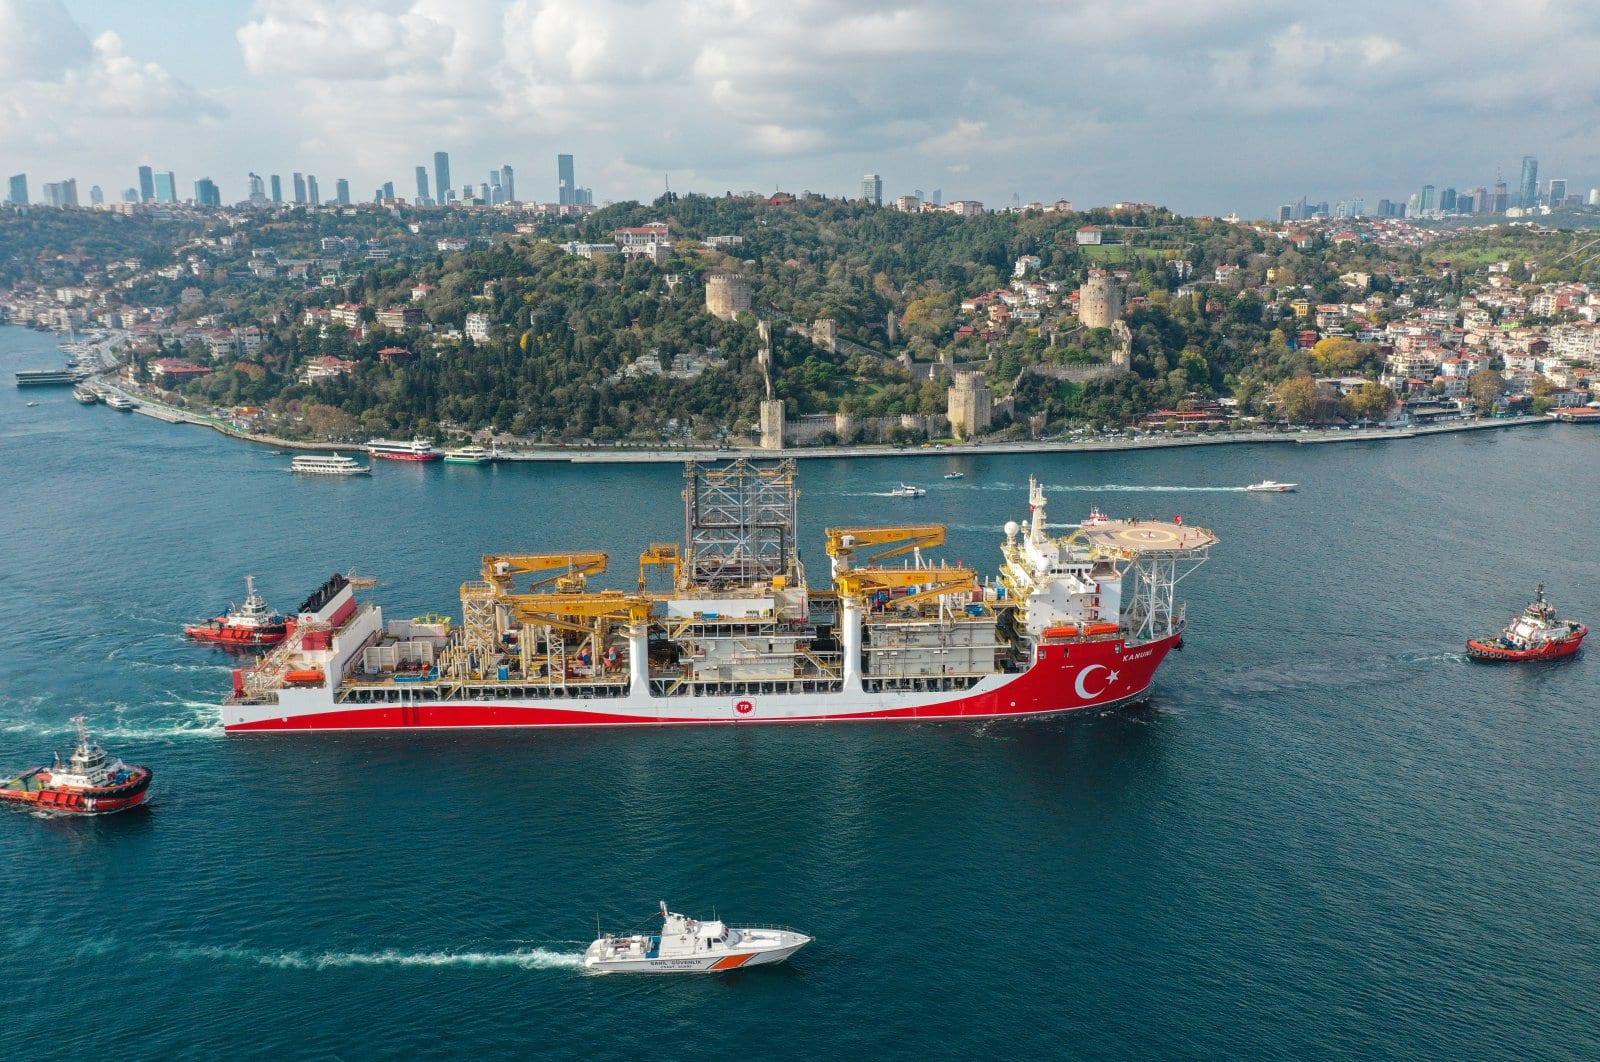 Turkey to add 4th vessel to expand its drilling fleet